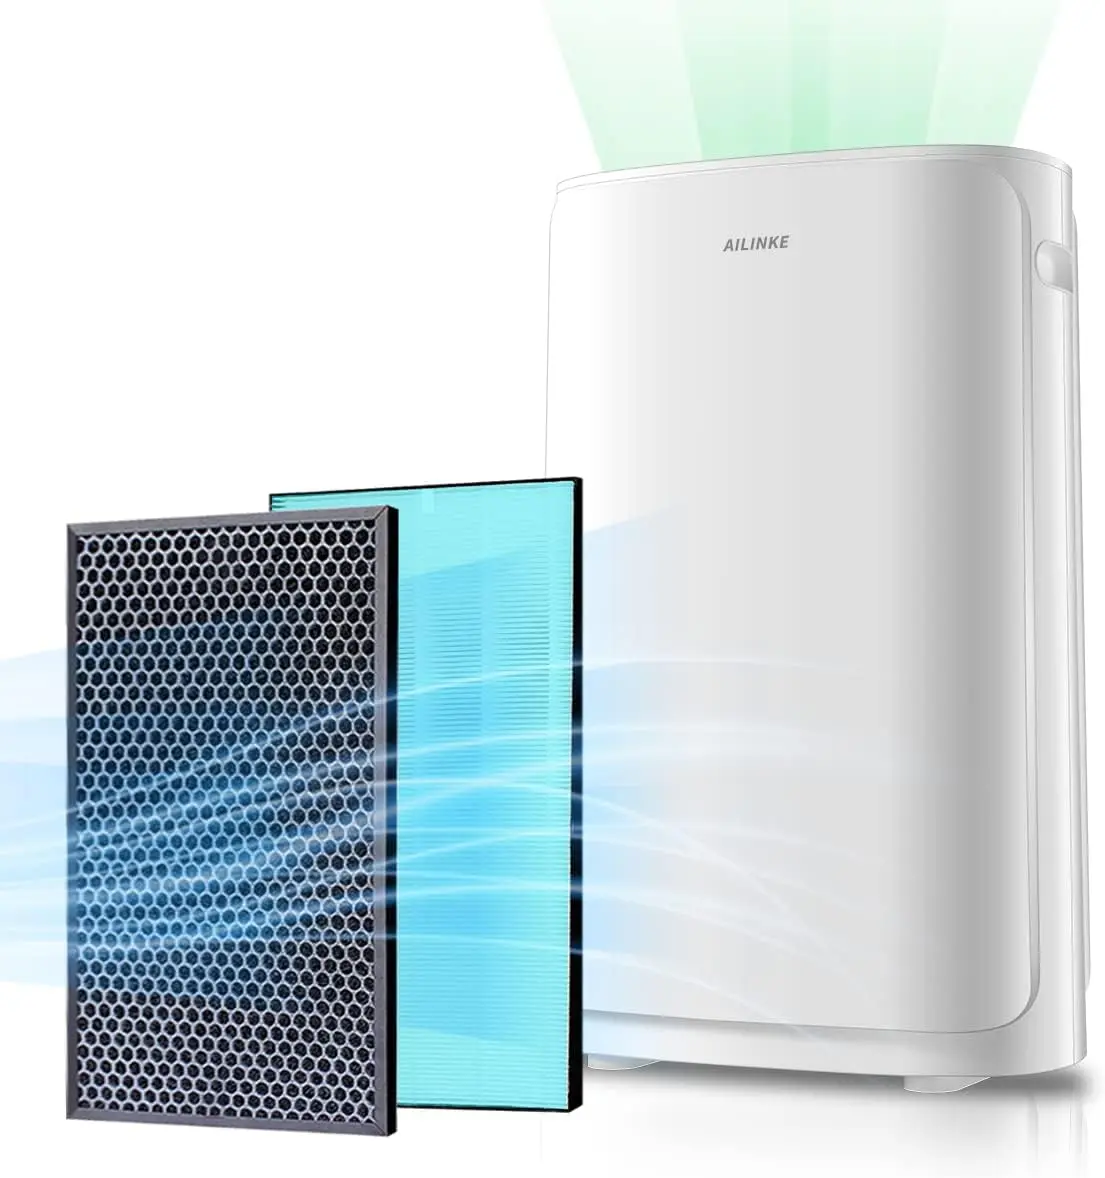 

Purifiers for Home Large Room, air purifier, 878 Sq Ft True HEPA Technology Filter Removal 99%+ for Pets Dander Smoke Odor Dust